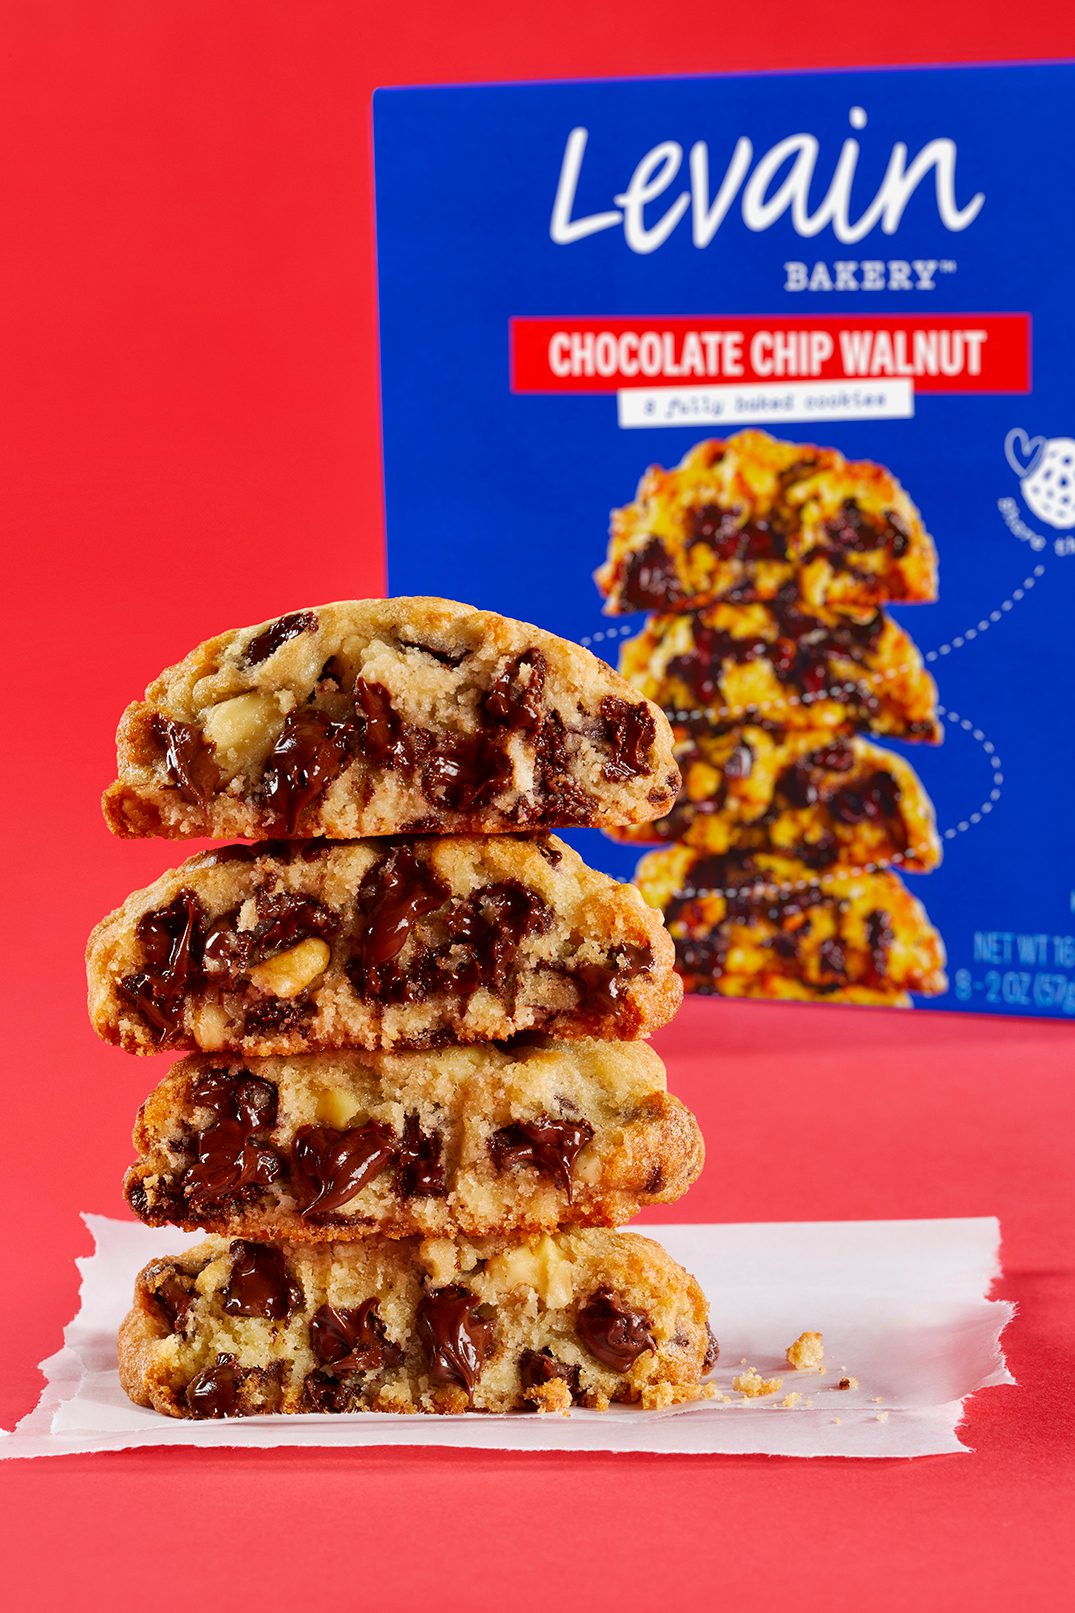 An open stack of 4 Levain Bakery Chocolate Chip Walnut cookies, revealing a gooey chocolate center, photographed on a red-colored background. Featured next to the cookie stack is a blue retail box of Levain Bakery Chocolate Chip Walnut Frozen Cookies.